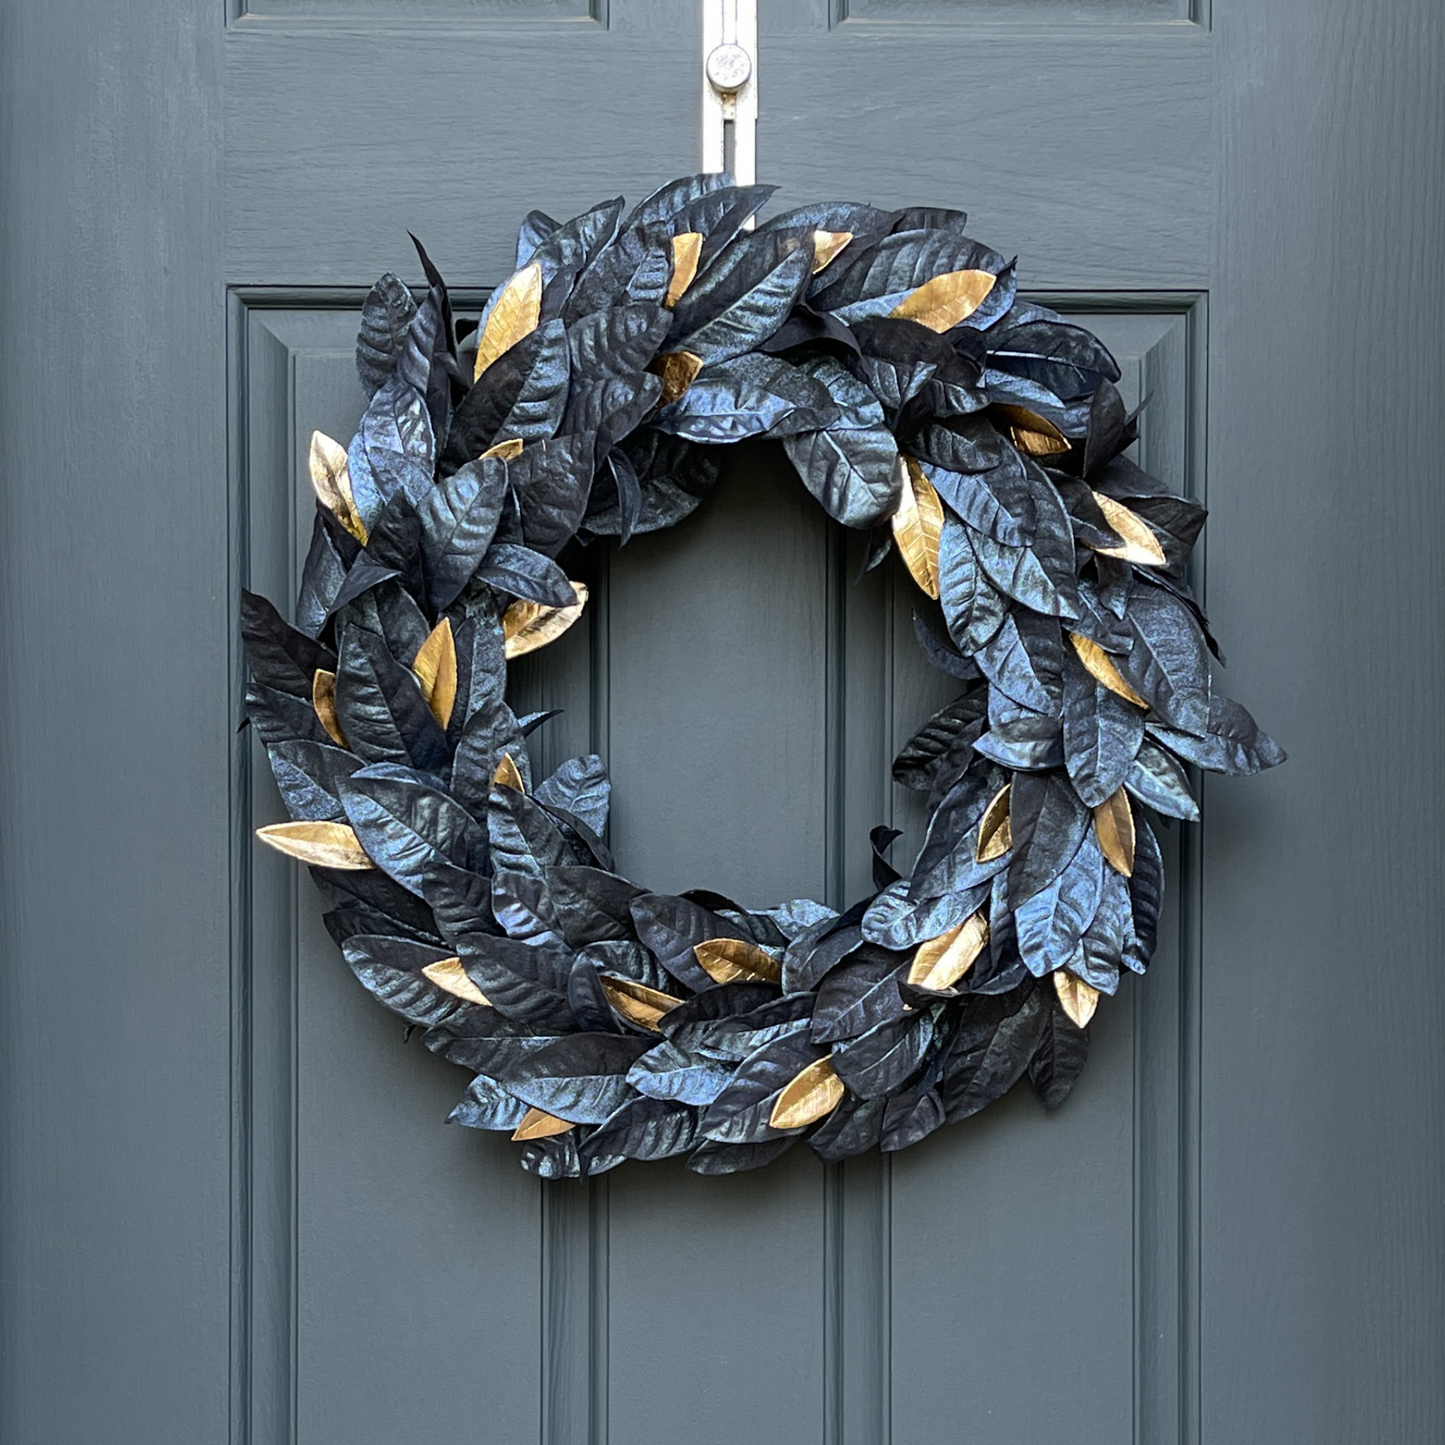 24" Halloween wreath featuring metallic black and gold leaves hanging on a dark blue door from a gold wreath hanger